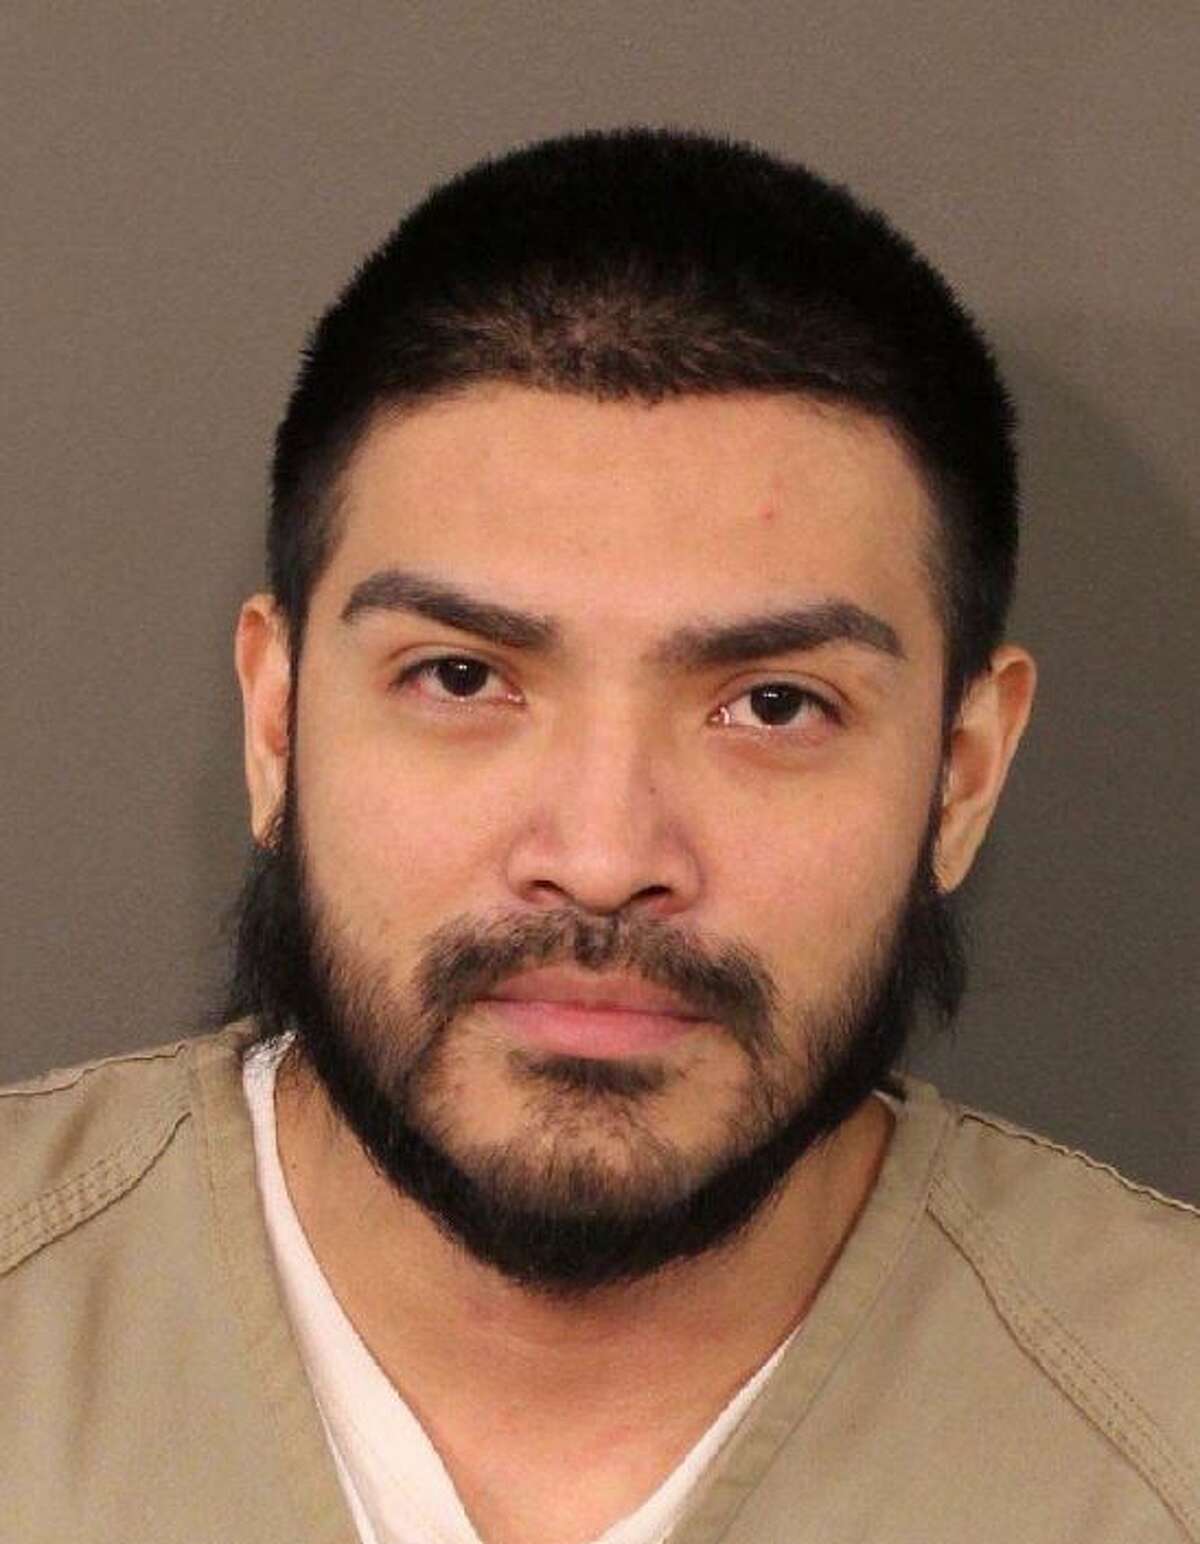 Gonzalez-Campos was sentenced to more than 39 years in federal prison for directing Cornejo-Alvarado's death and for two murders in the Columbus, Ohio area.